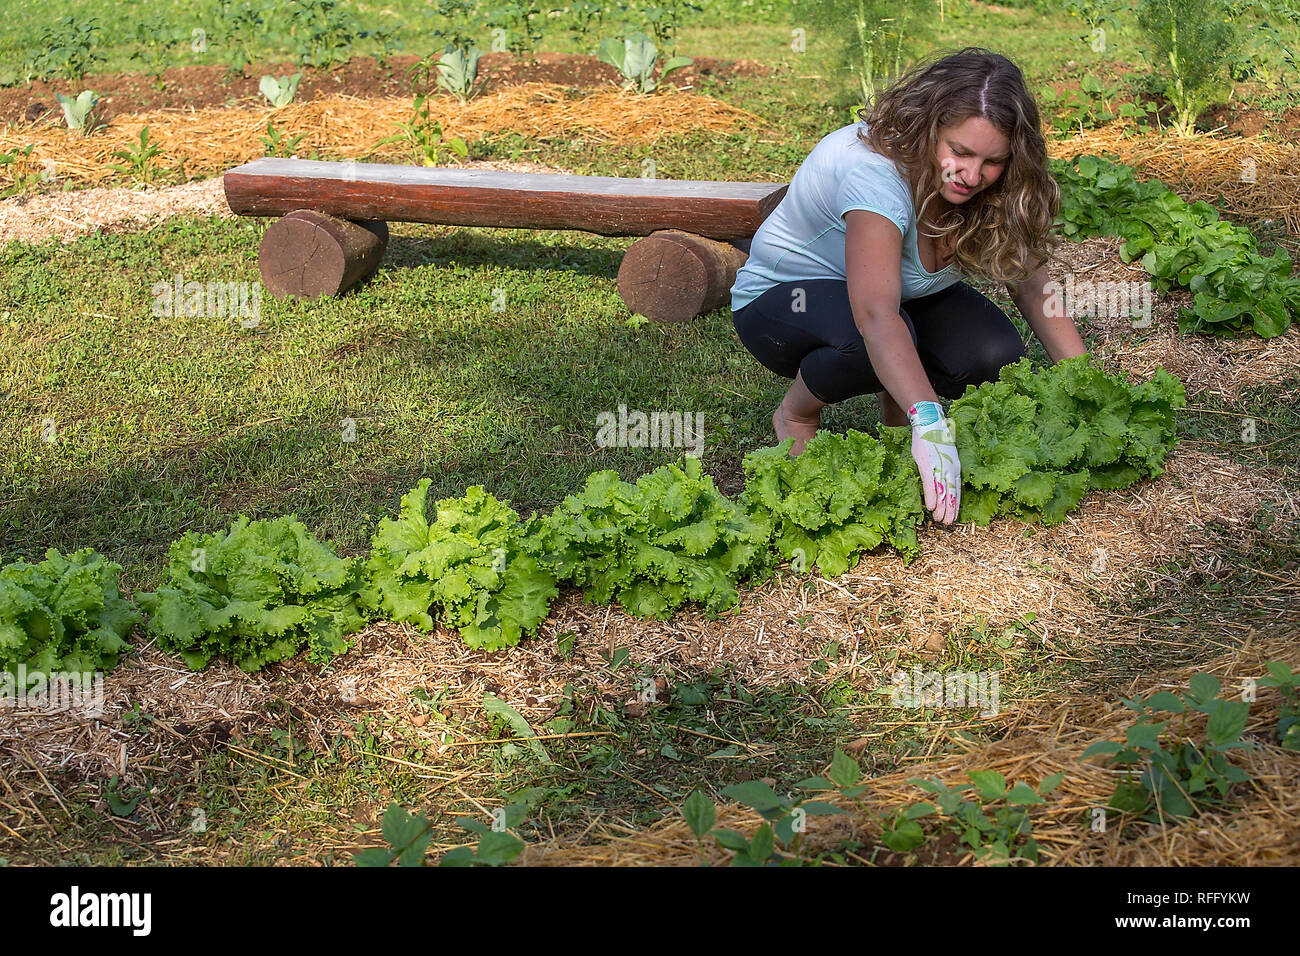 Young woman Working in a Home Grown Vegetable Garden Stock Photo